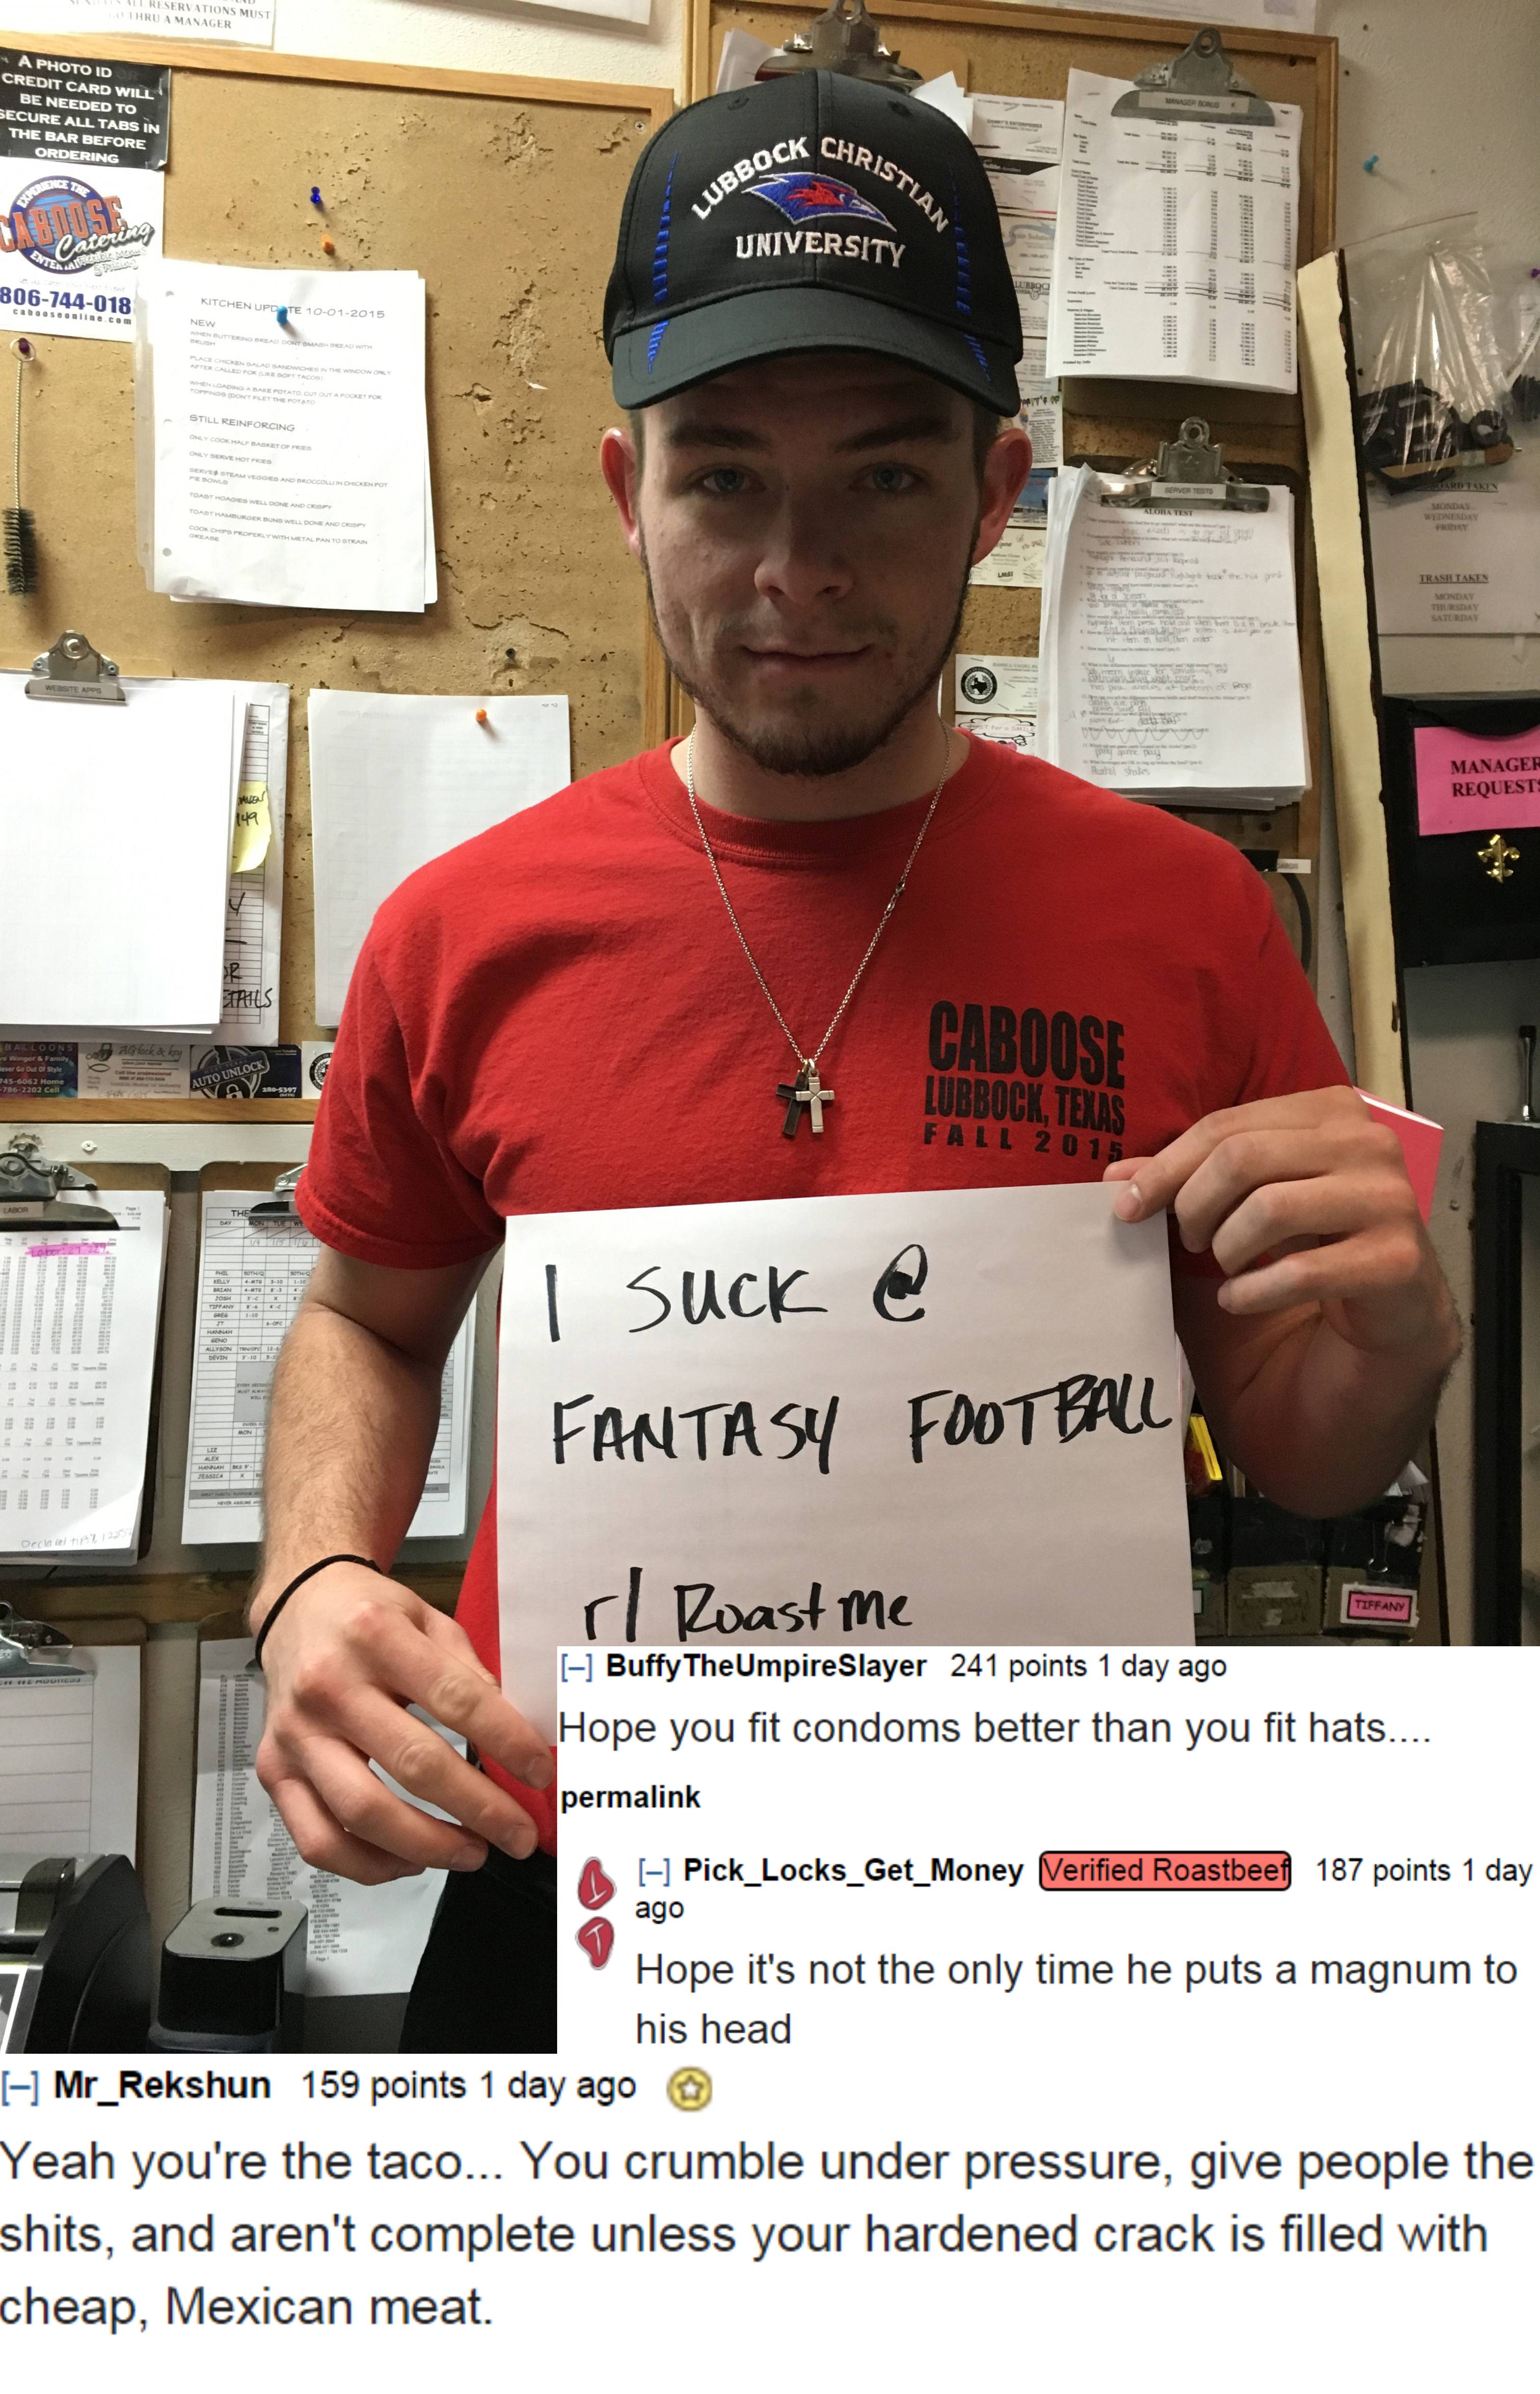 roasts and burns - University Caboos Tree Tail | Suck @ Fantasy Football c Roast me Buty TheUmpire Slayer 241 points 1 days Hope you fit condoms better than you fit hats A H Pick Locks Get Money 187 points day Hope it's not the only time he puts a magnum 